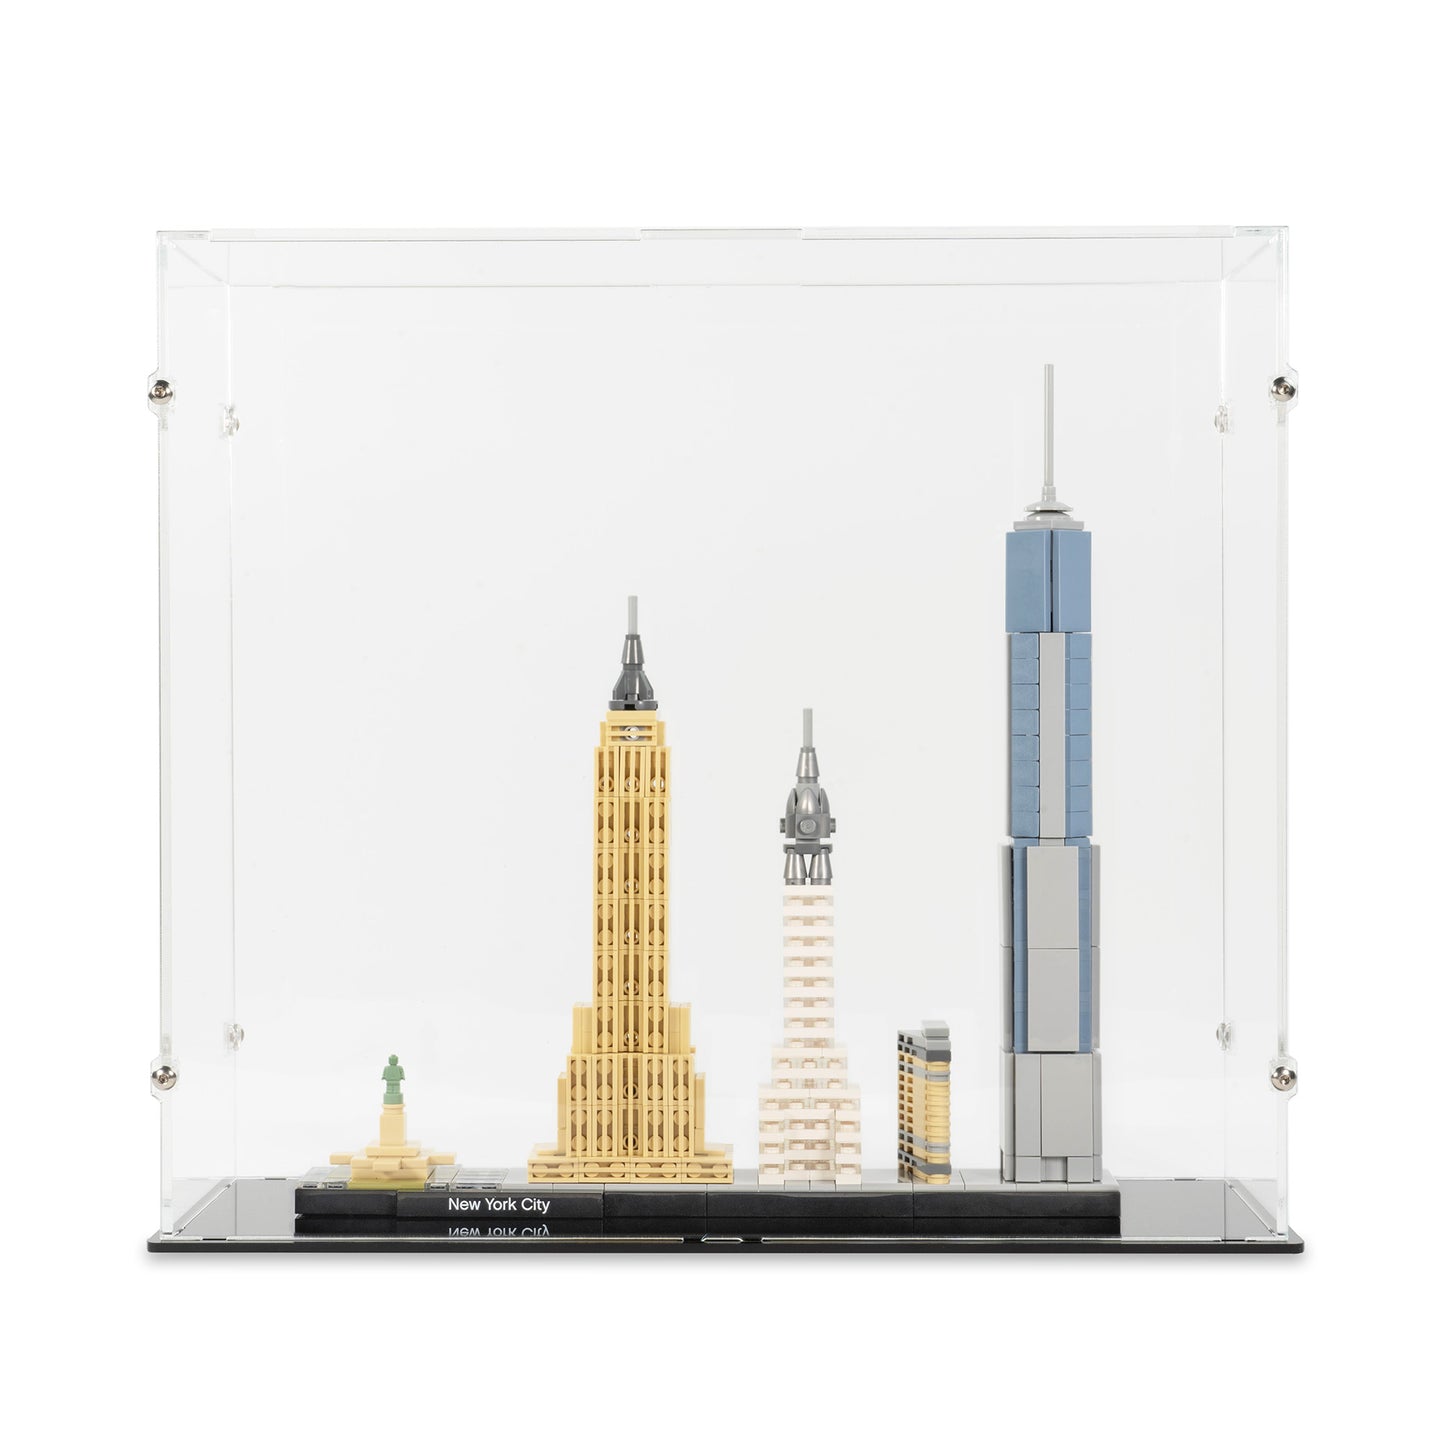 Front view of LEGO 21028 New York City Display Case.